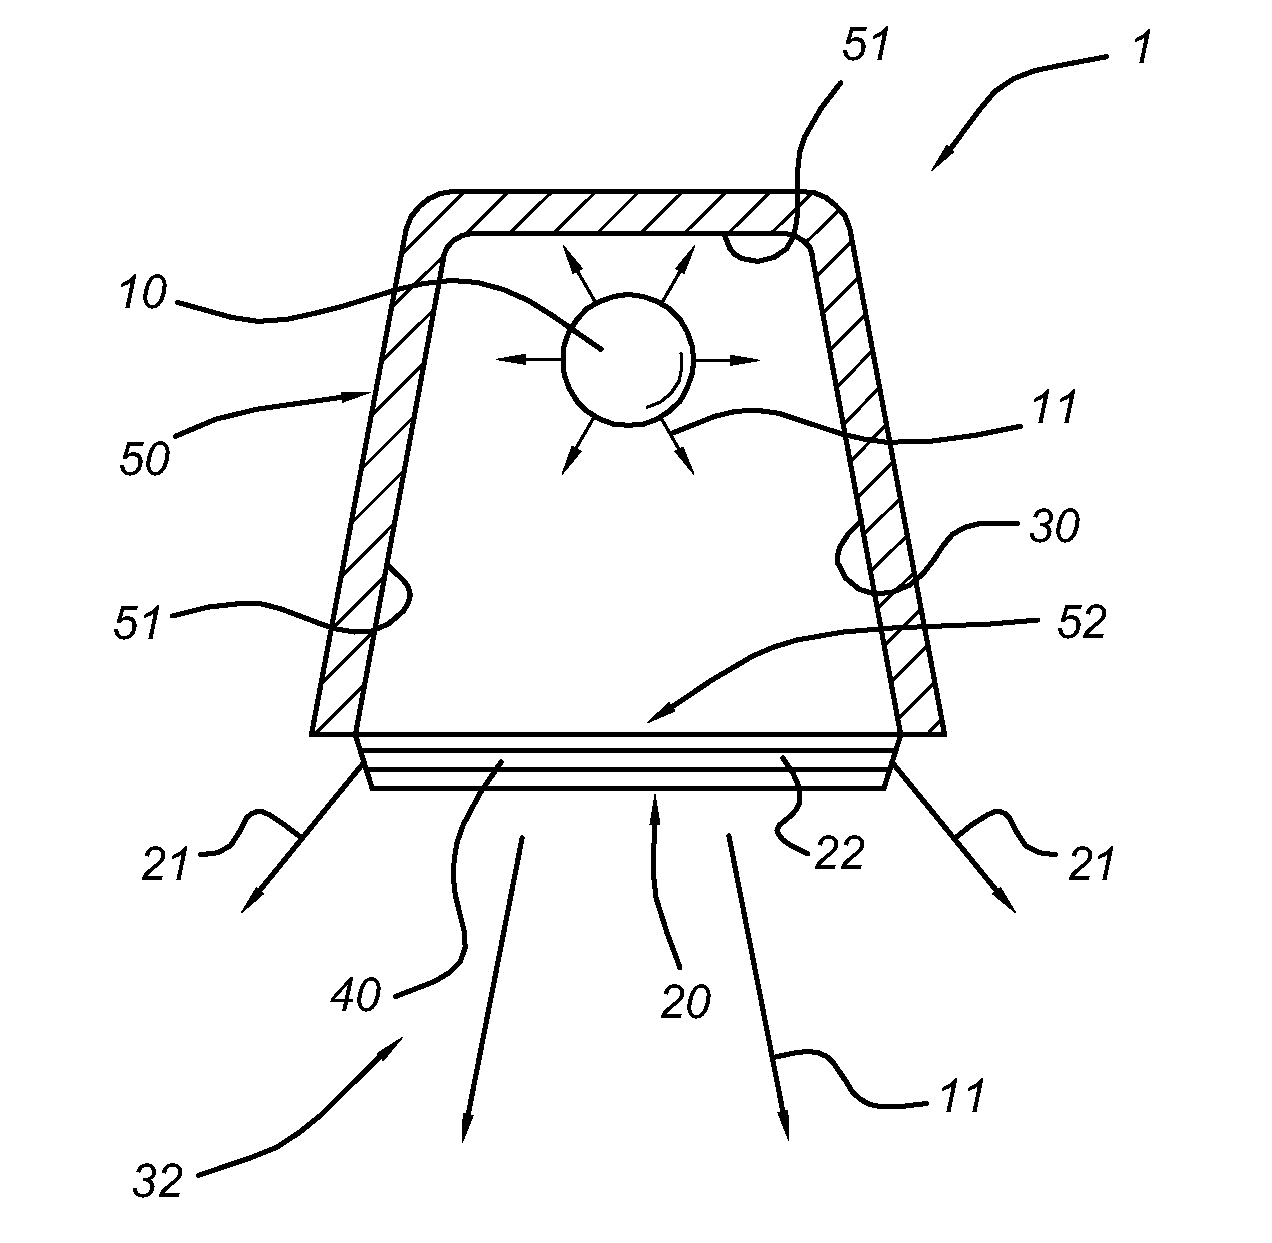 Lighting device comprising at least one lamp and at least one OLED